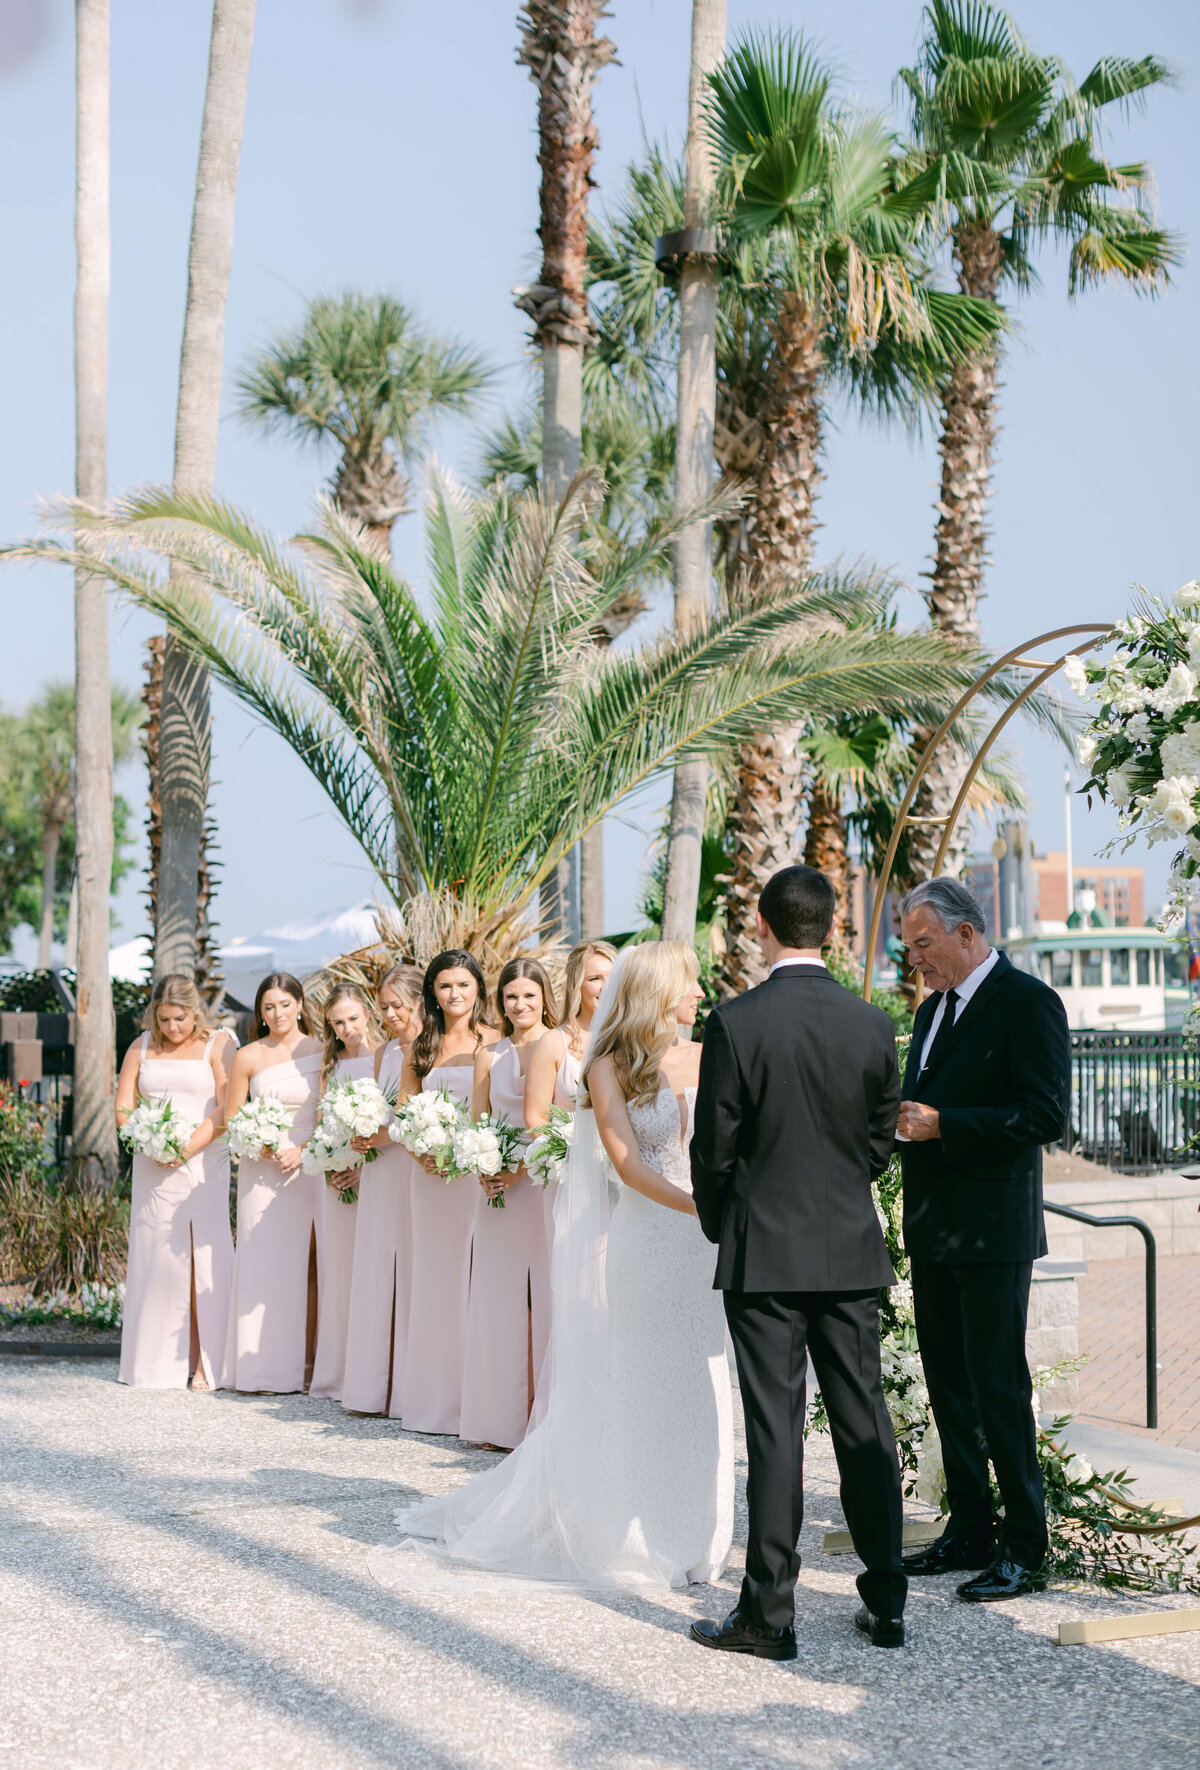 A bride stands before her groom backed by her bridesmaids.